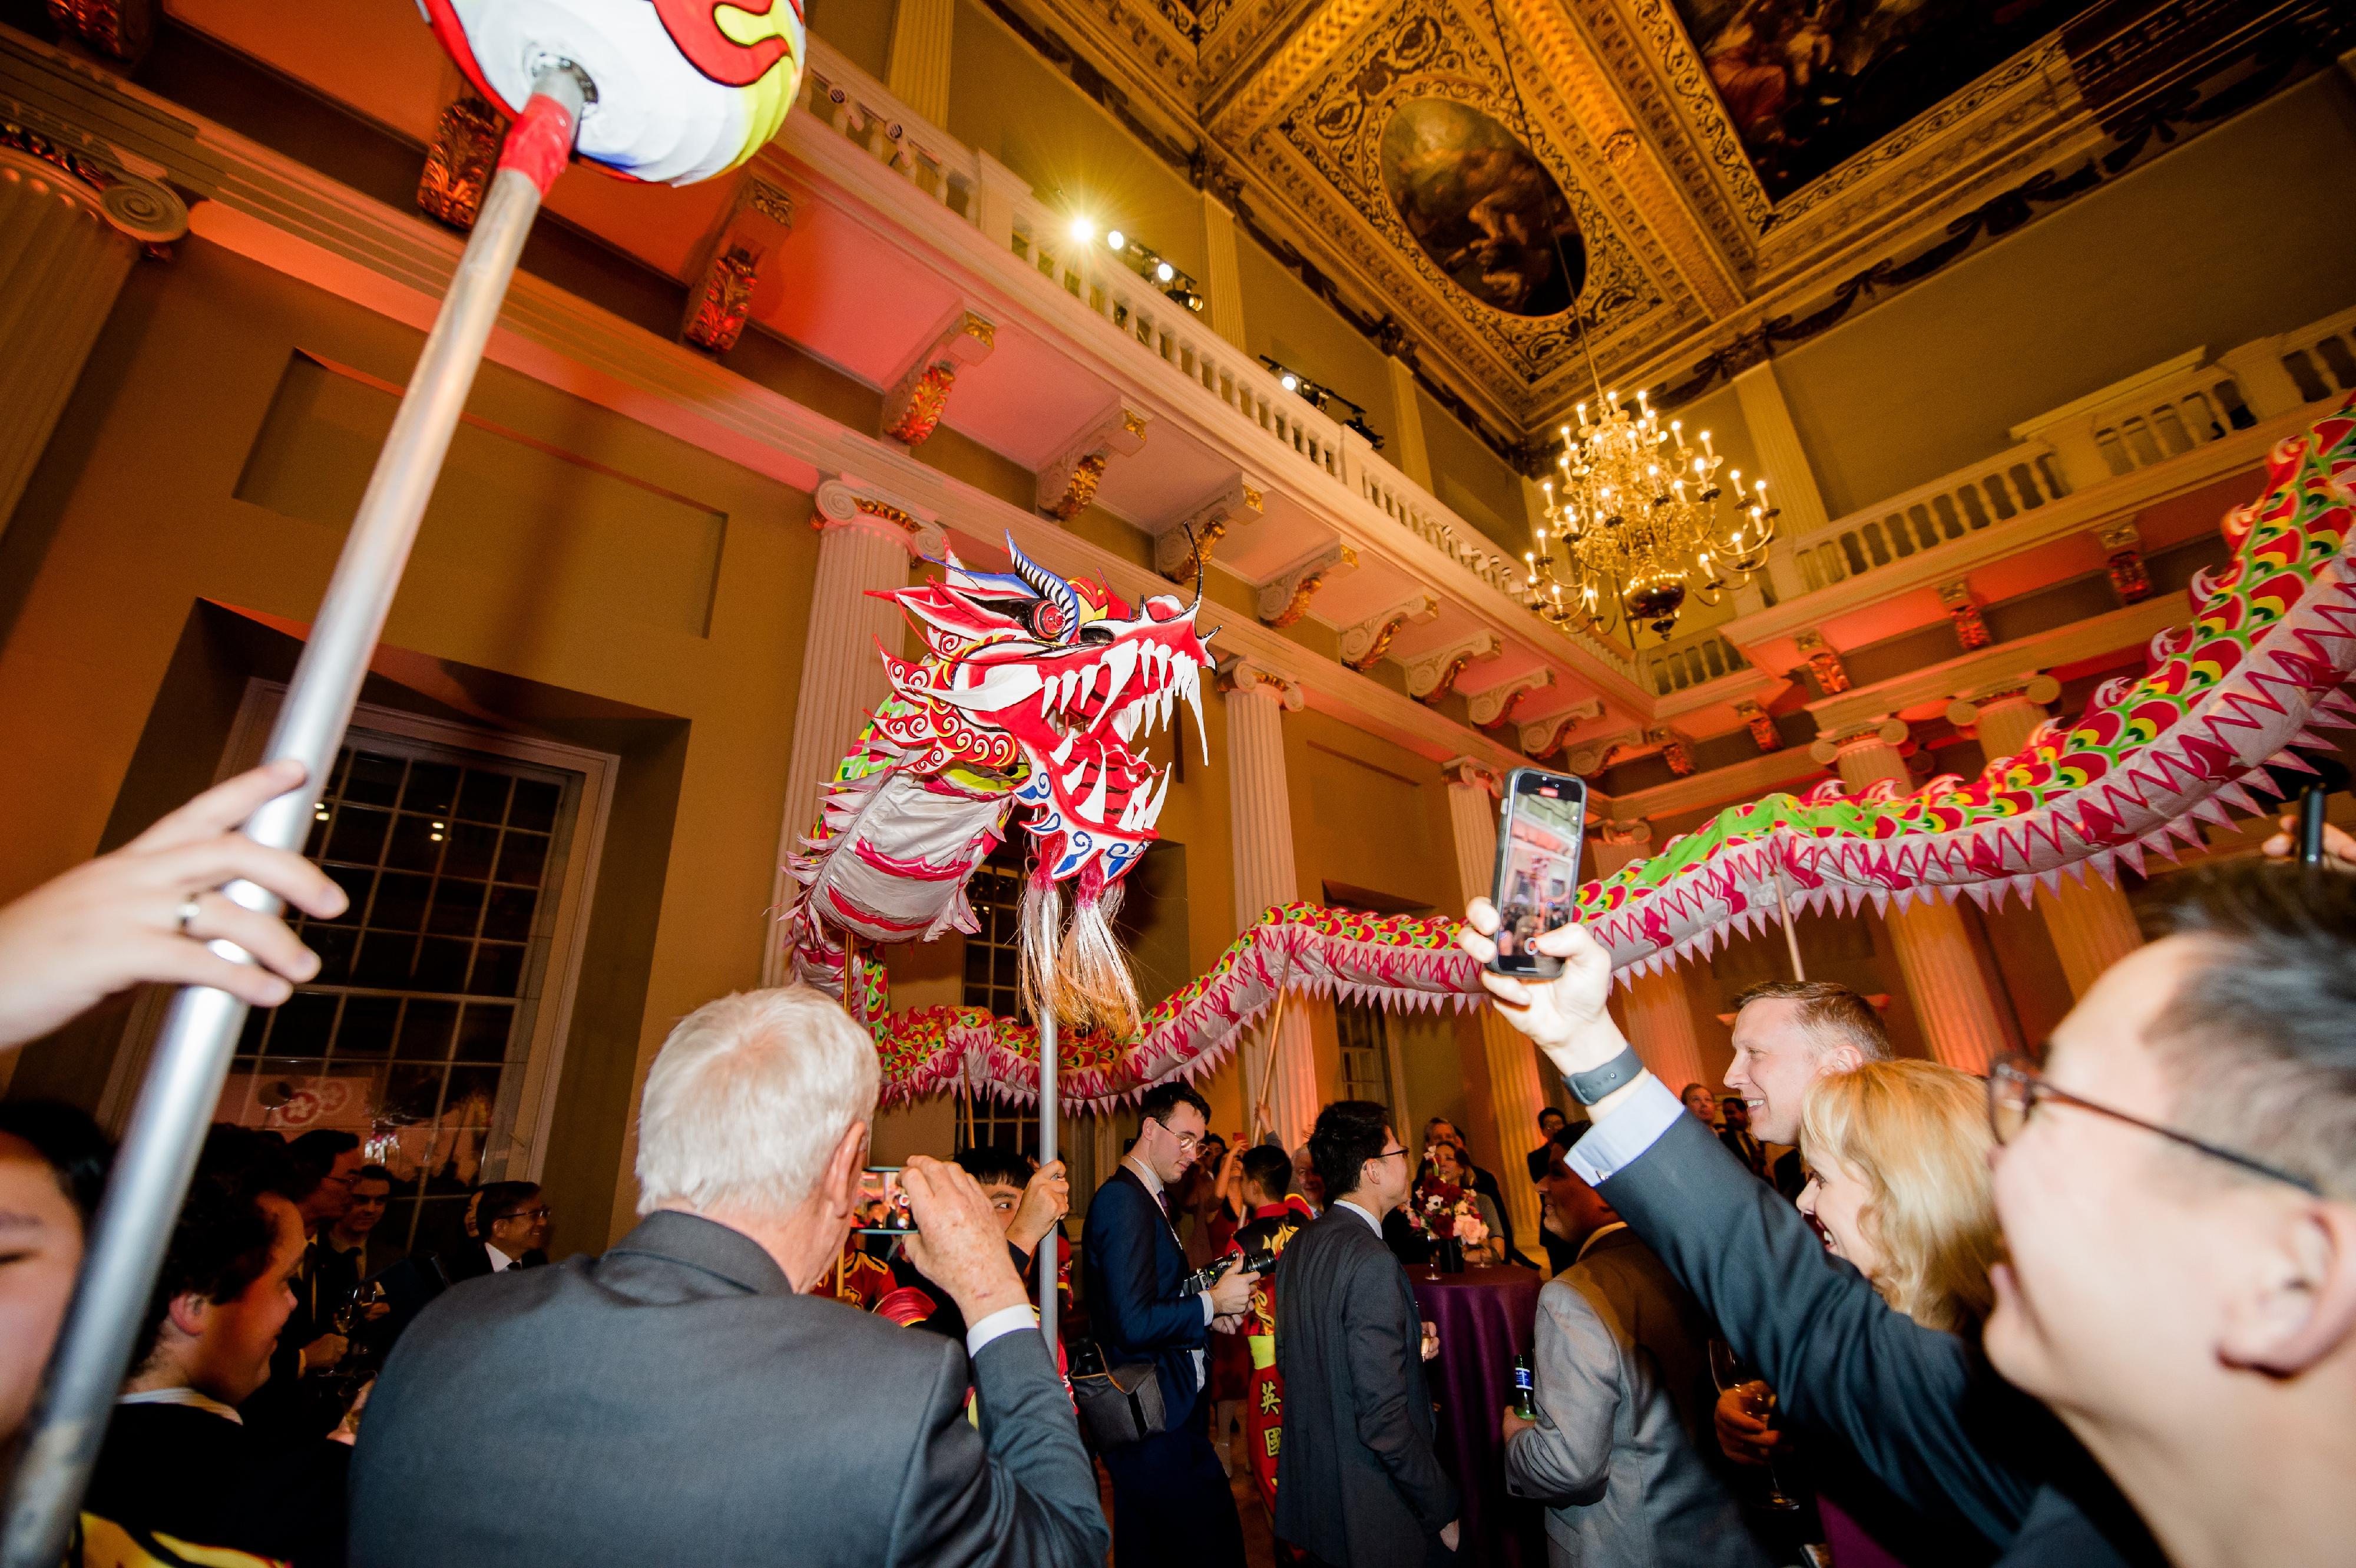 The Hong Kong Economic and Trade Office, London greeted the Year of the Dragon in the United Kingdom by hosting a celebratory reception at Banqueting House, Whitehall, in London on February 13 (London time). Photo shows the dragon dance performance at the reception.
